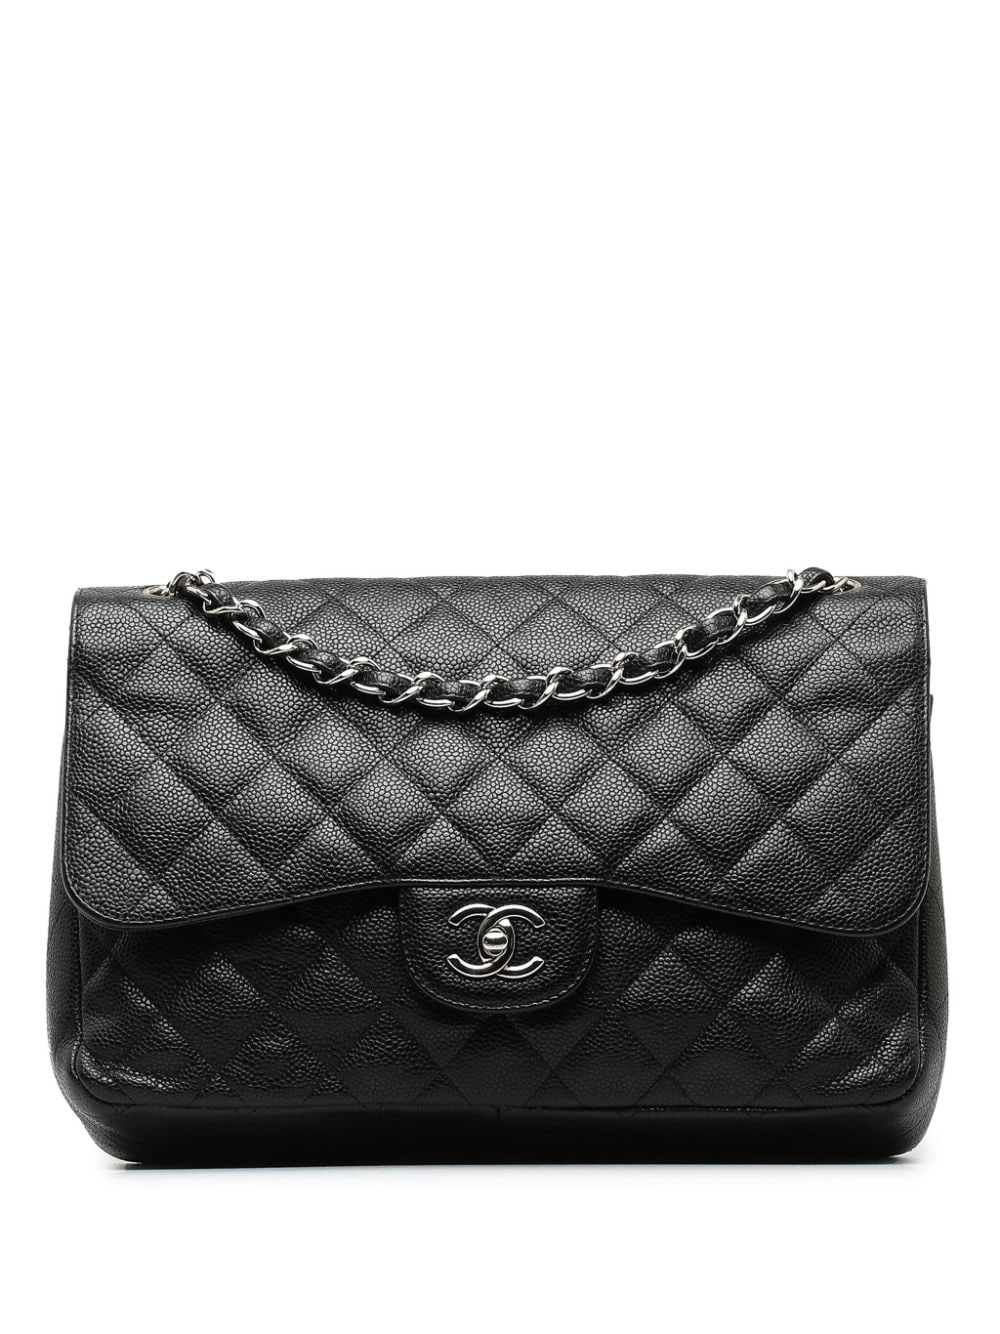 CHANEL Pre-Owned 2010-2011 Jumbo Classic Caviar Double Flap shoulder bag - Black von CHANEL Pre-Owned